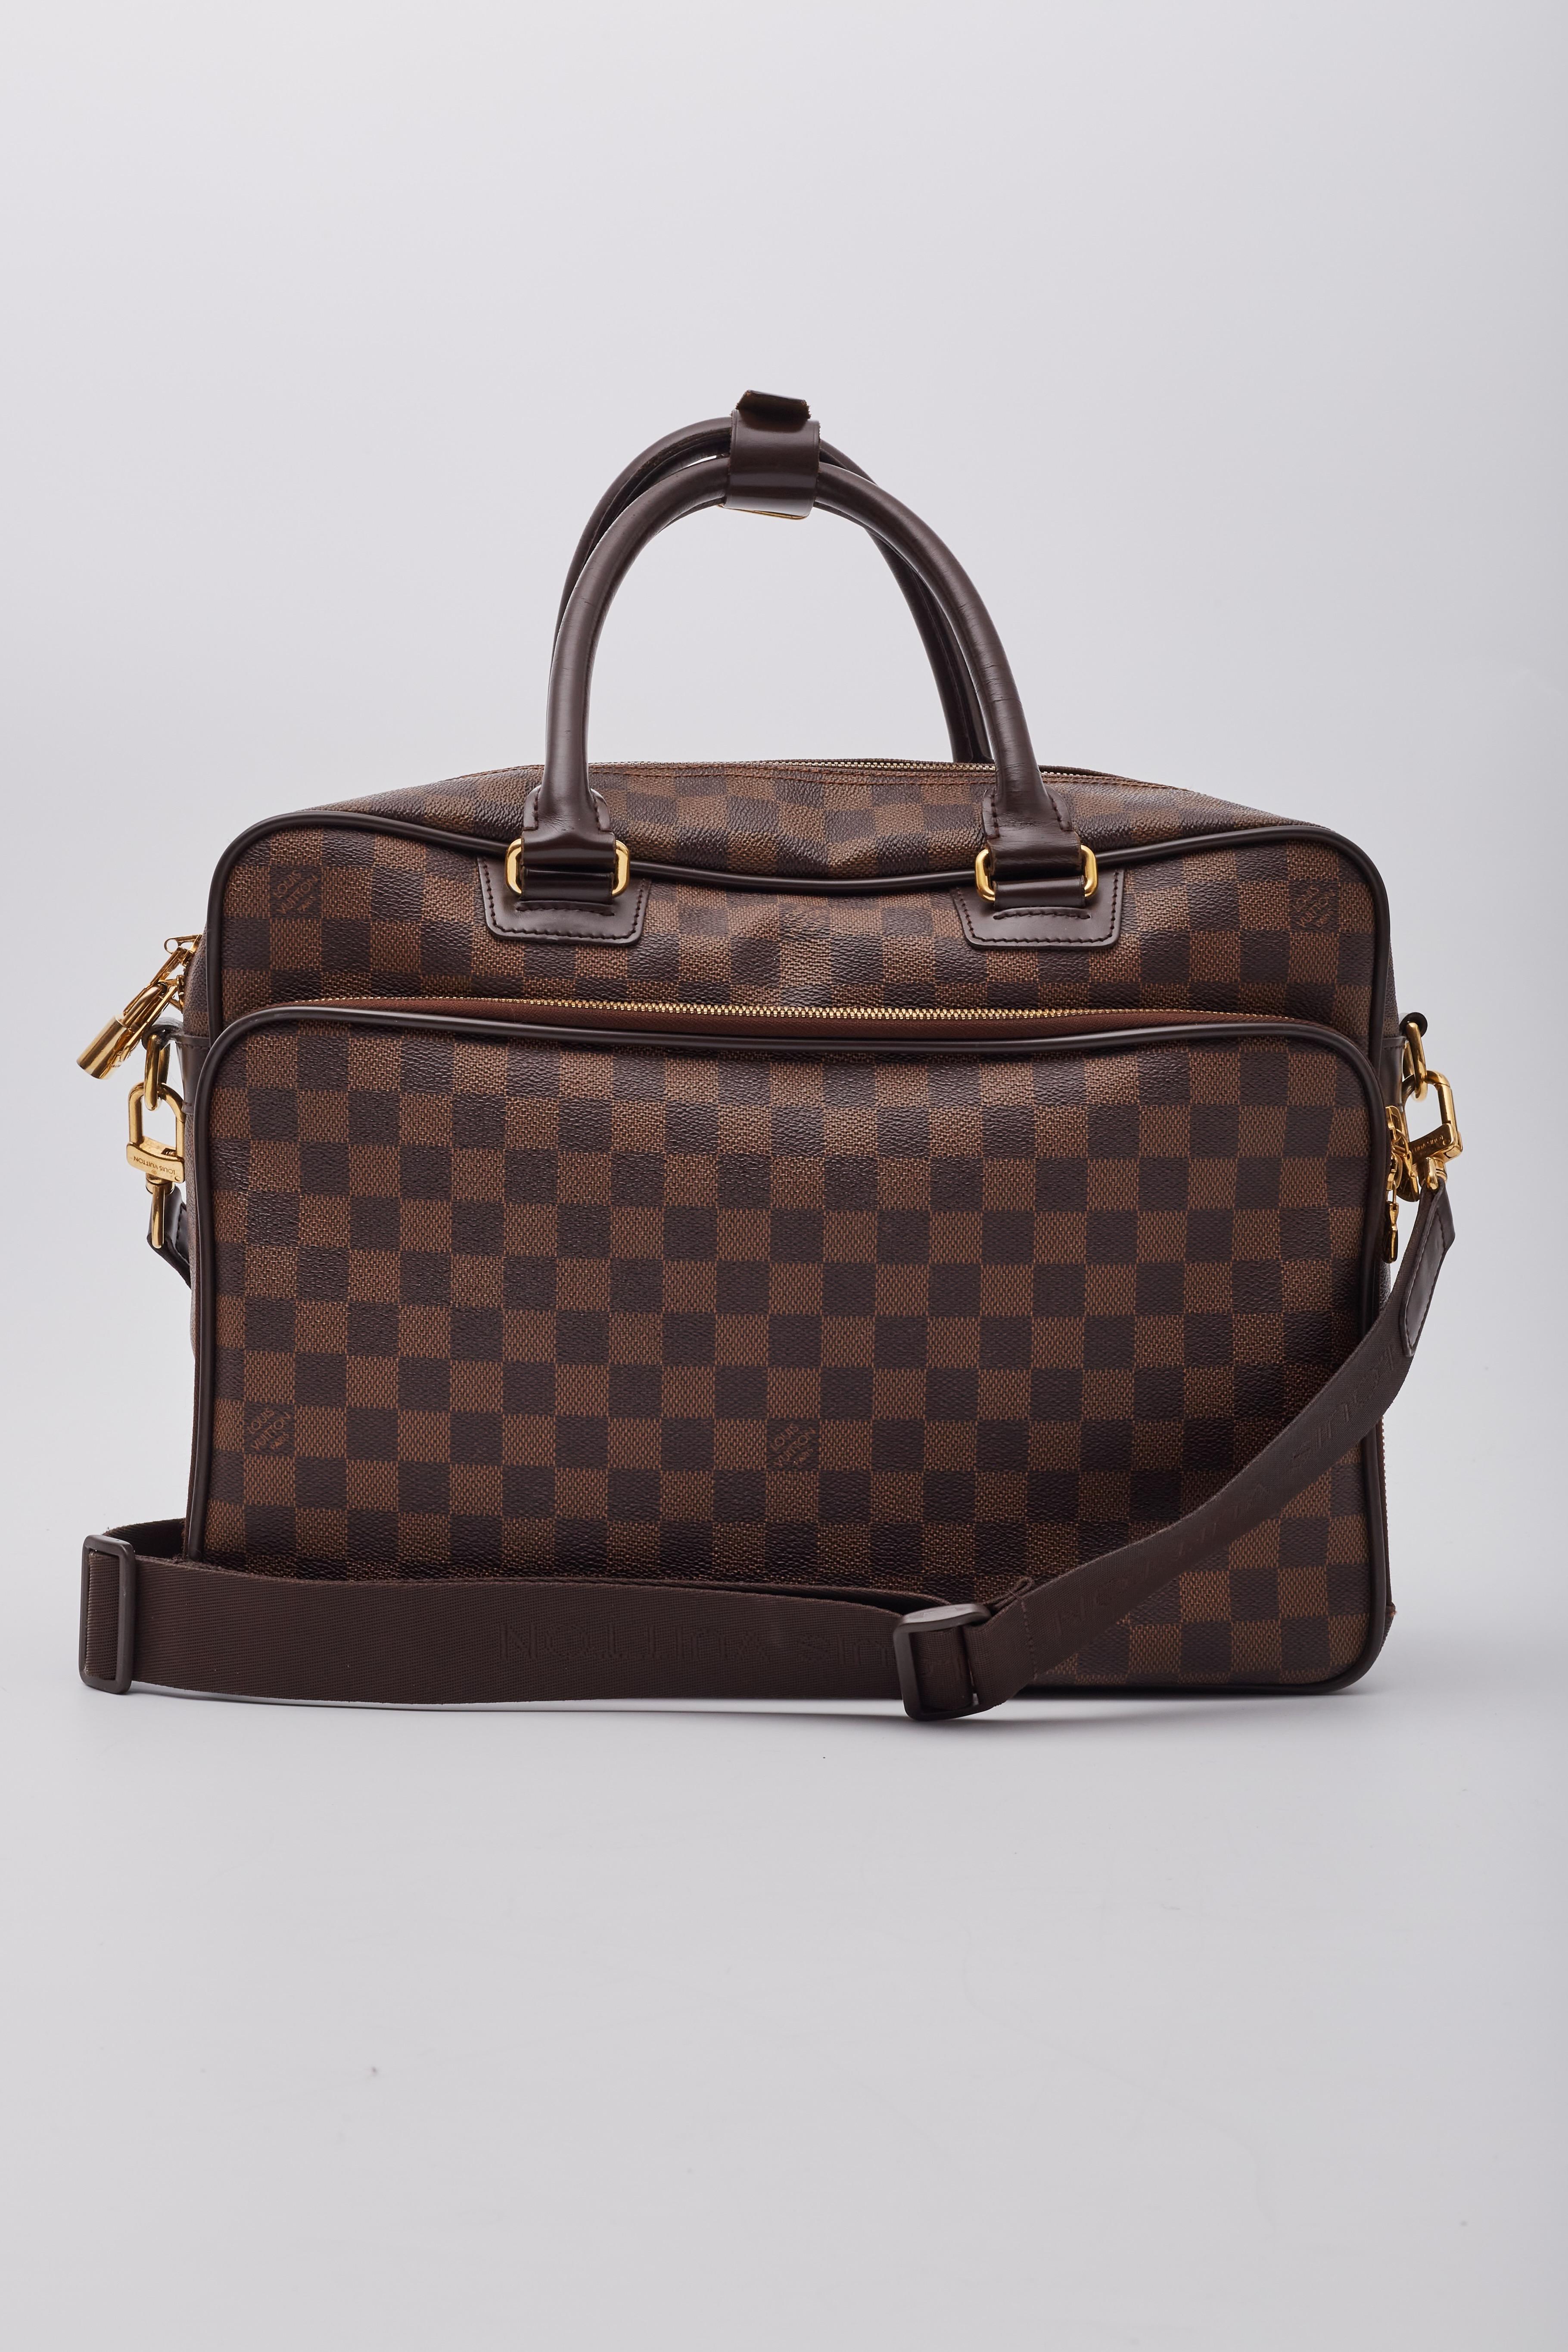 Louis Vuitton Damier Ebene Icare Book Messenger Bag In Good Condition For Sale In Montreal, Quebec